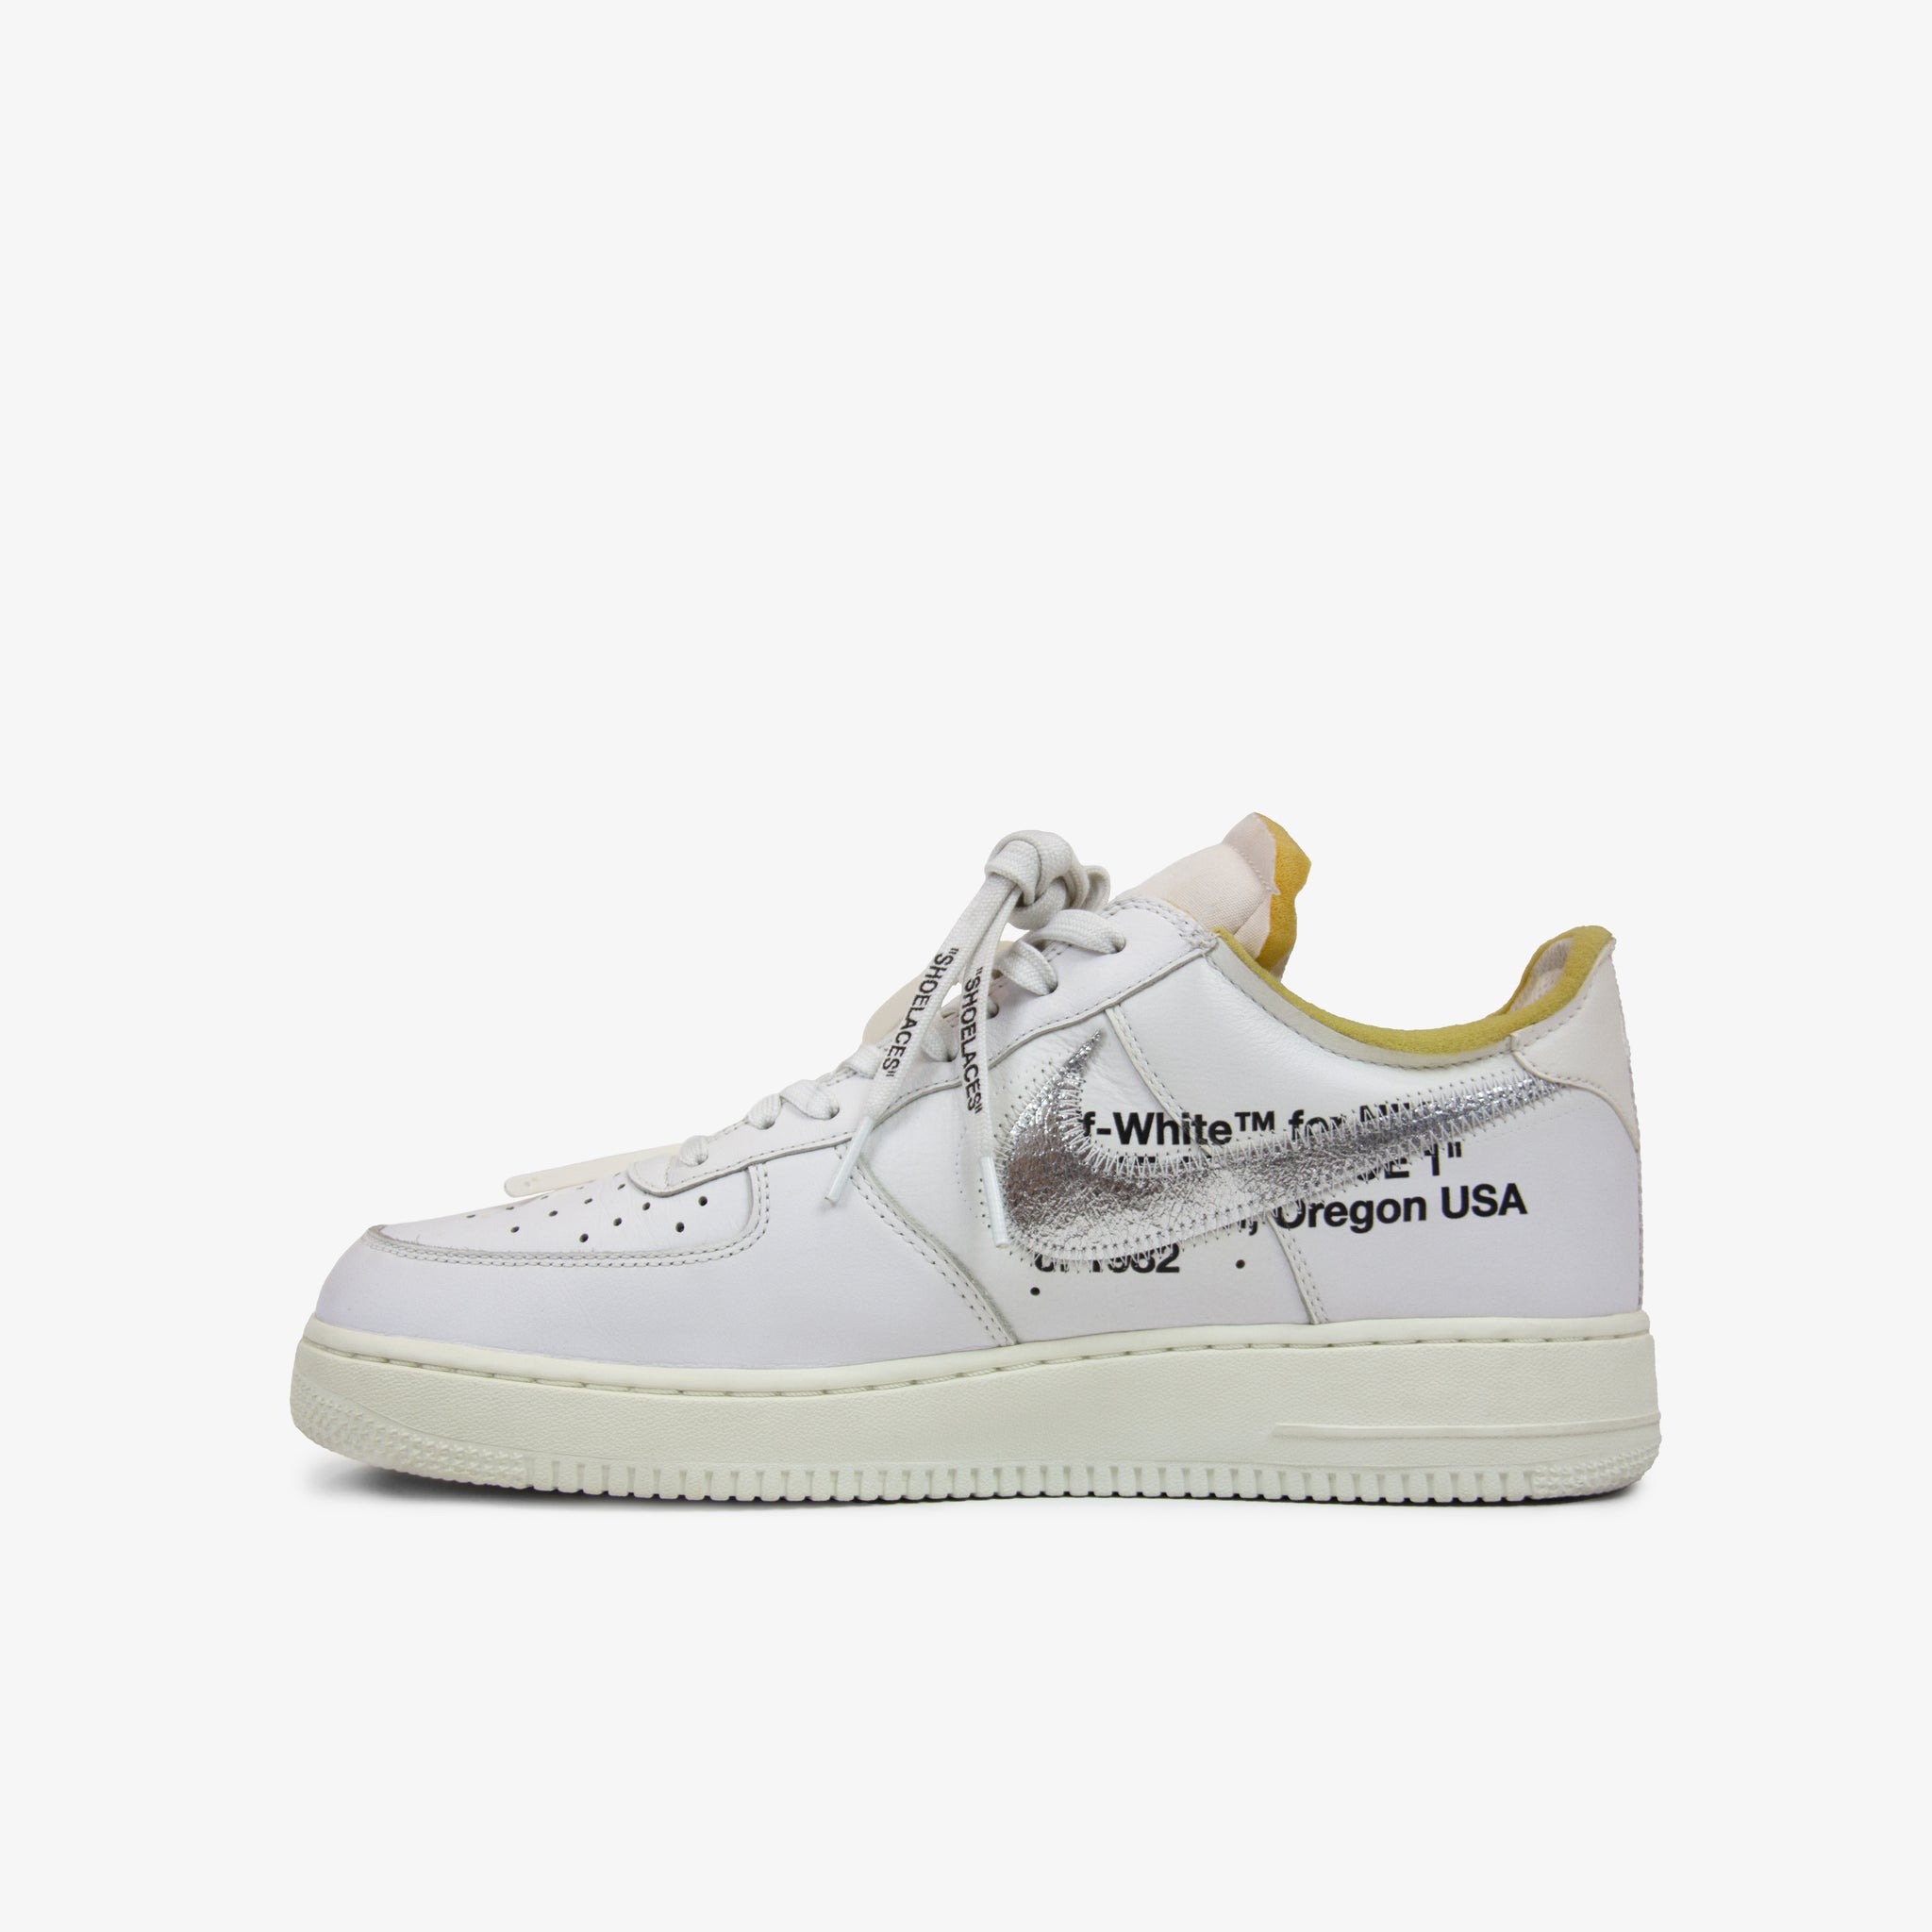 Buy Off-White x Air Force 1 'ComplexCon Exclusive' - AO4297 100